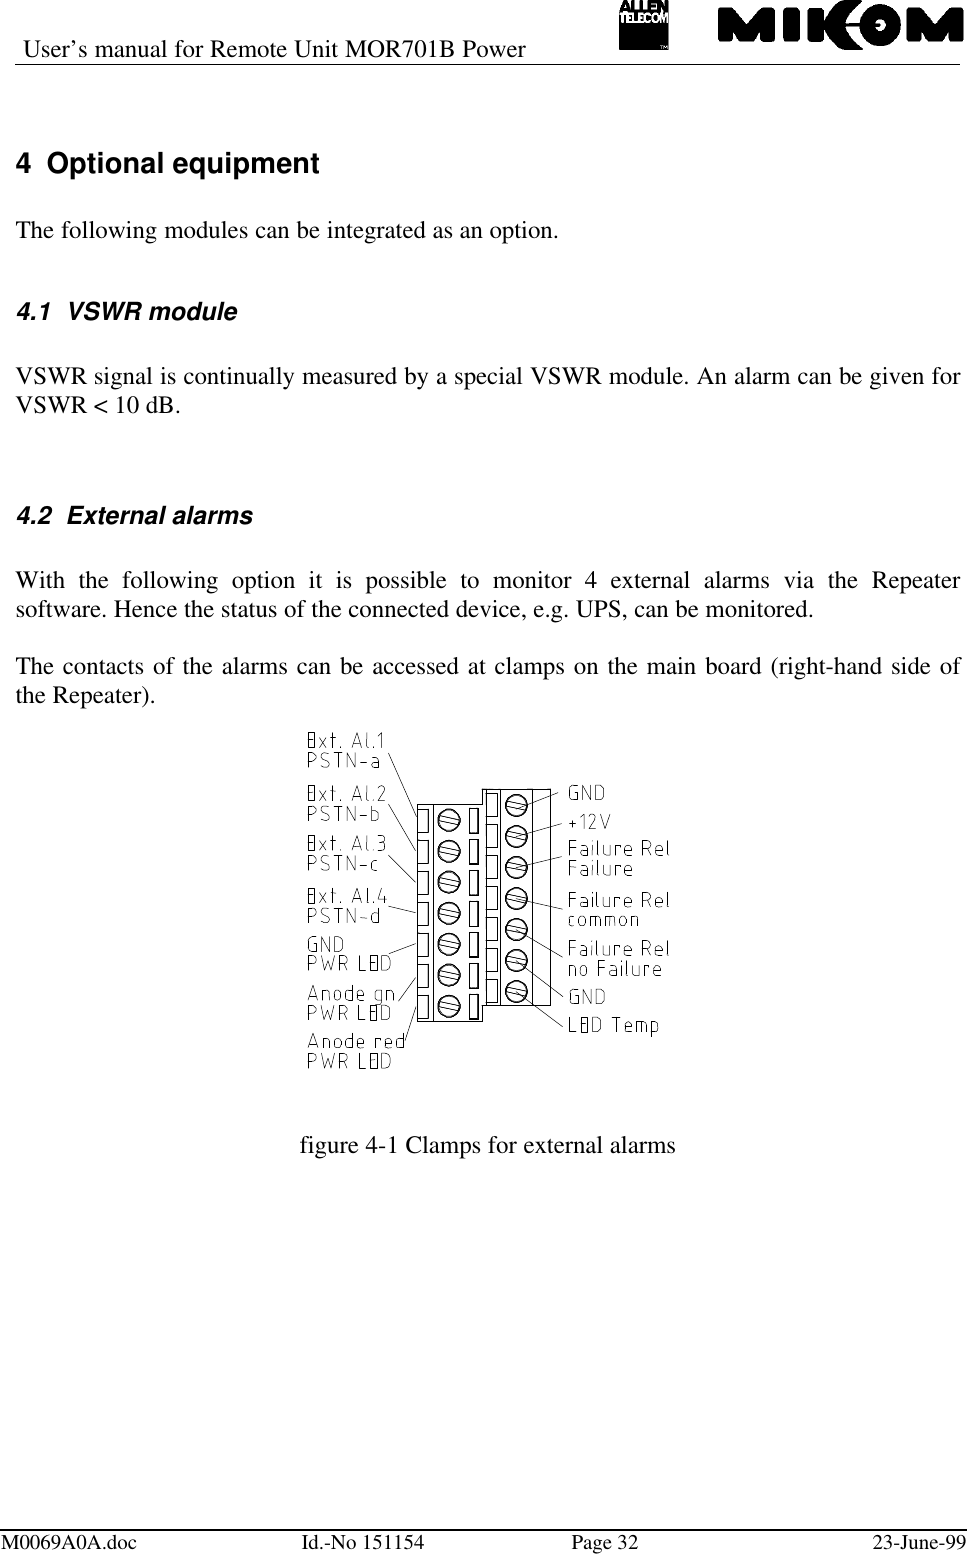 User’s manual for Remote Unit MOR701B PowerM0069A0A.doc Id.-No 151154 Page 32 23-June-994 Optional equipmentThe following modules can be integrated as an option.4.1 VSWR moduleVSWR signal is continually measured by a special VSWR module. An alarm can be given forVSWR &lt; 10 dB.4.2 External alarmsWith the following option it is possible to monitor 4 external alarms via the Repeatersoftware. Hence the status of the connected device, e.g. UPS, can be monitored.The contacts of the alarms can be accessed at clamps on the main board (right-hand side ofthe Repeater).figure 4-1 Clamps for external alarms